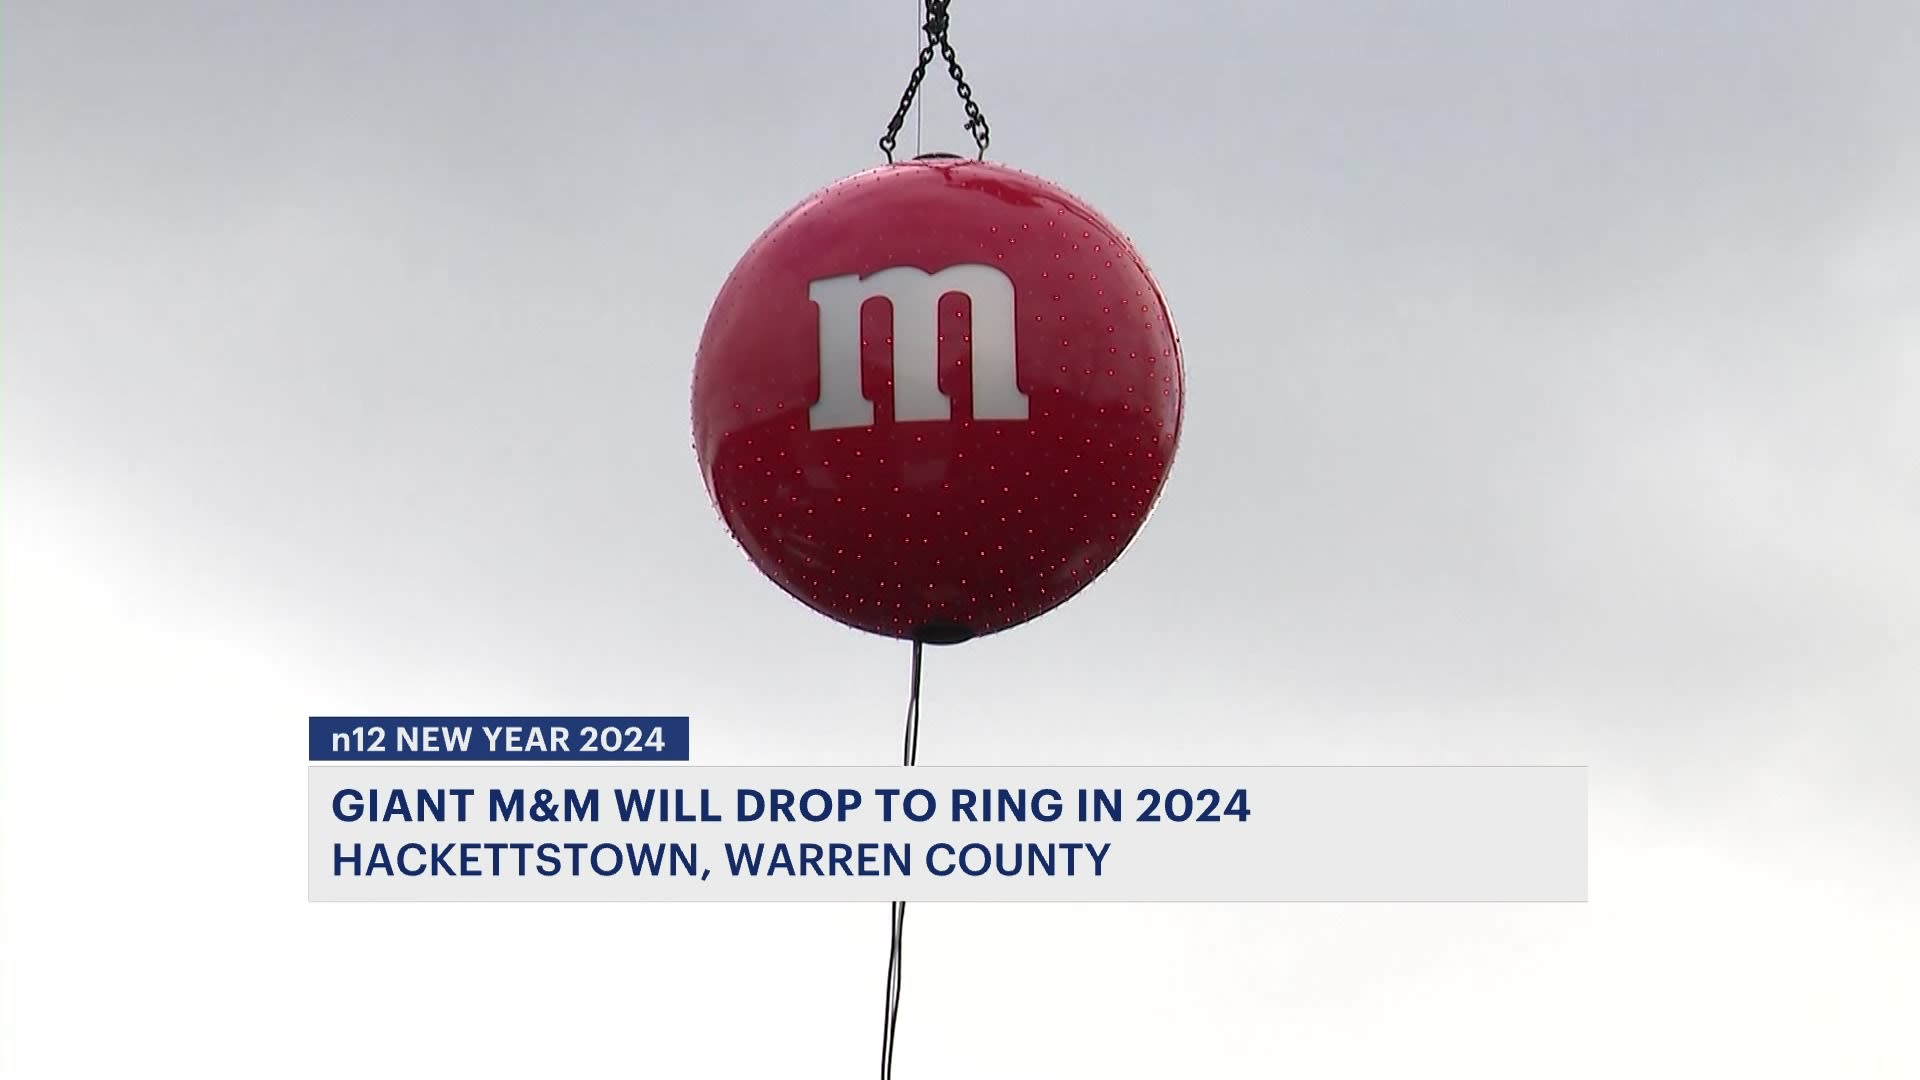 Hackettstown to drop giant M&M to ring in 2024